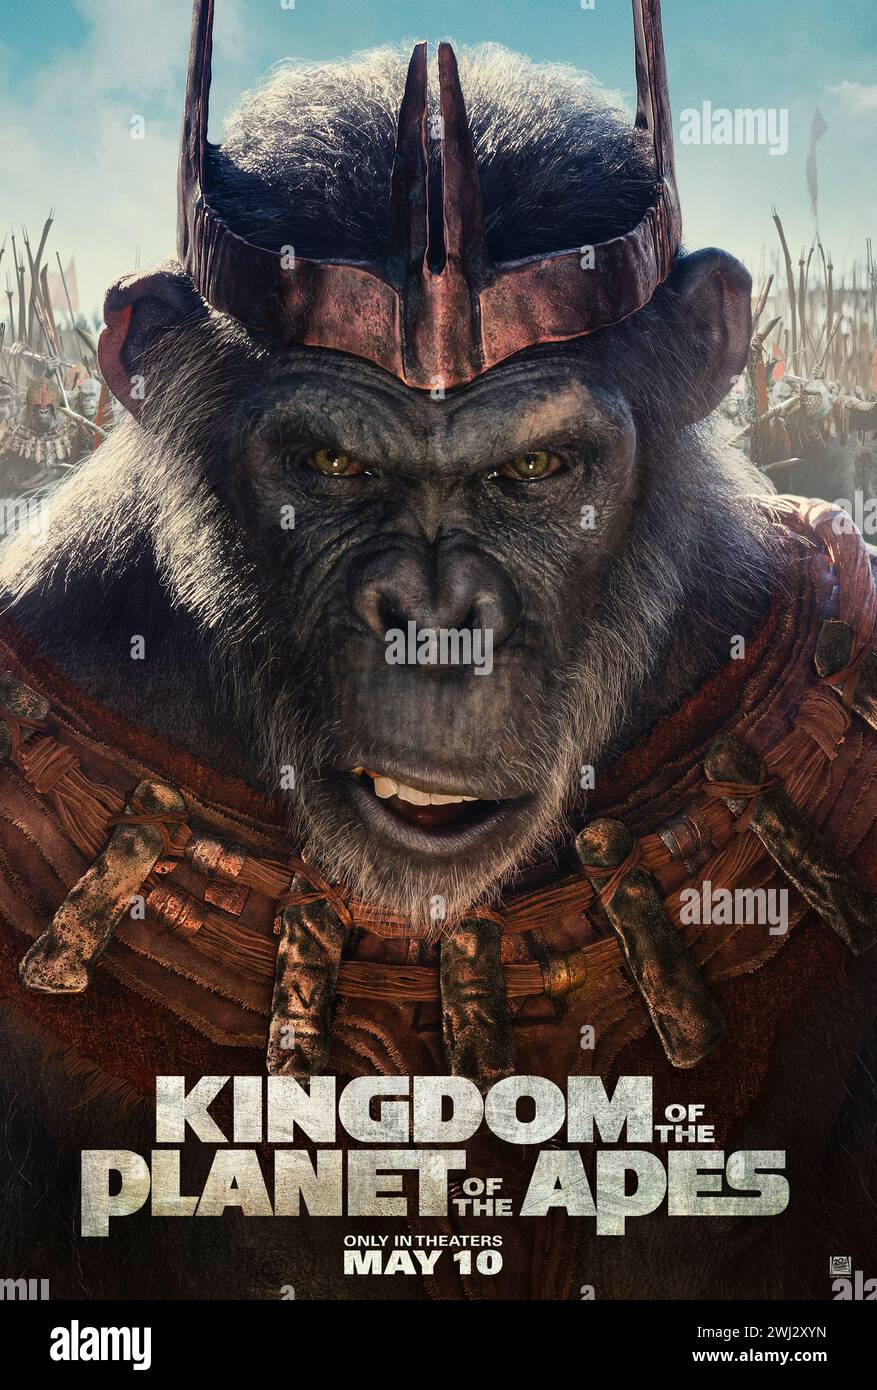 Kingdom of the Planet of the Apes (2024) directed by Wes Ball and starring Kevin Durand as Proximus Caesar, a powerful bonobo ruler. Noa, a common chimpanzee, embarks on a harrowing journey alongside a young human named Nova to determine the future for apes and humans alike.. US character poster ***EDITORIAL USE ONLY***. Credit: BFA / Twentieth Century Studios Stock Photo